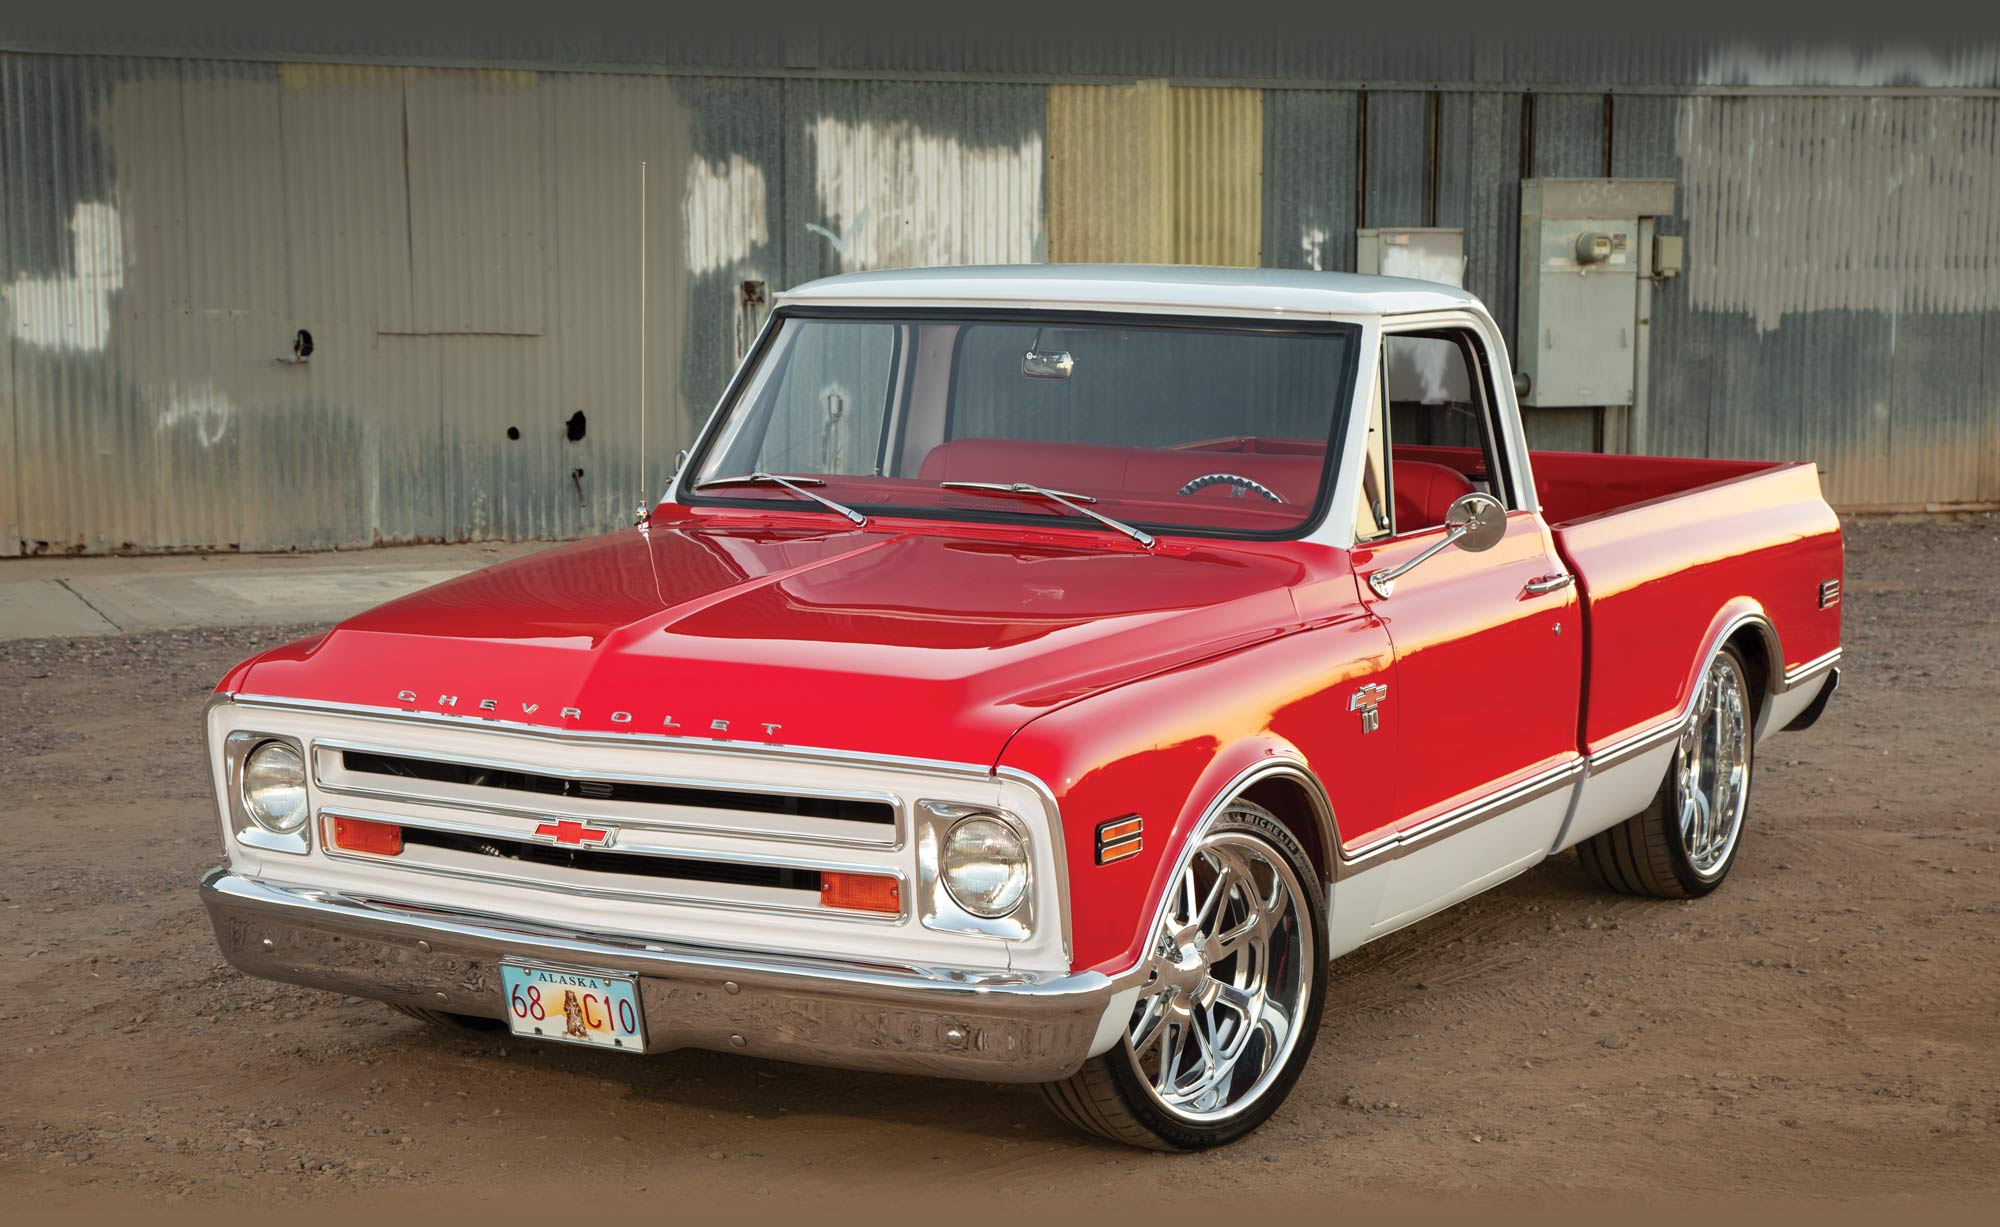 Front side view of the ’68 C10